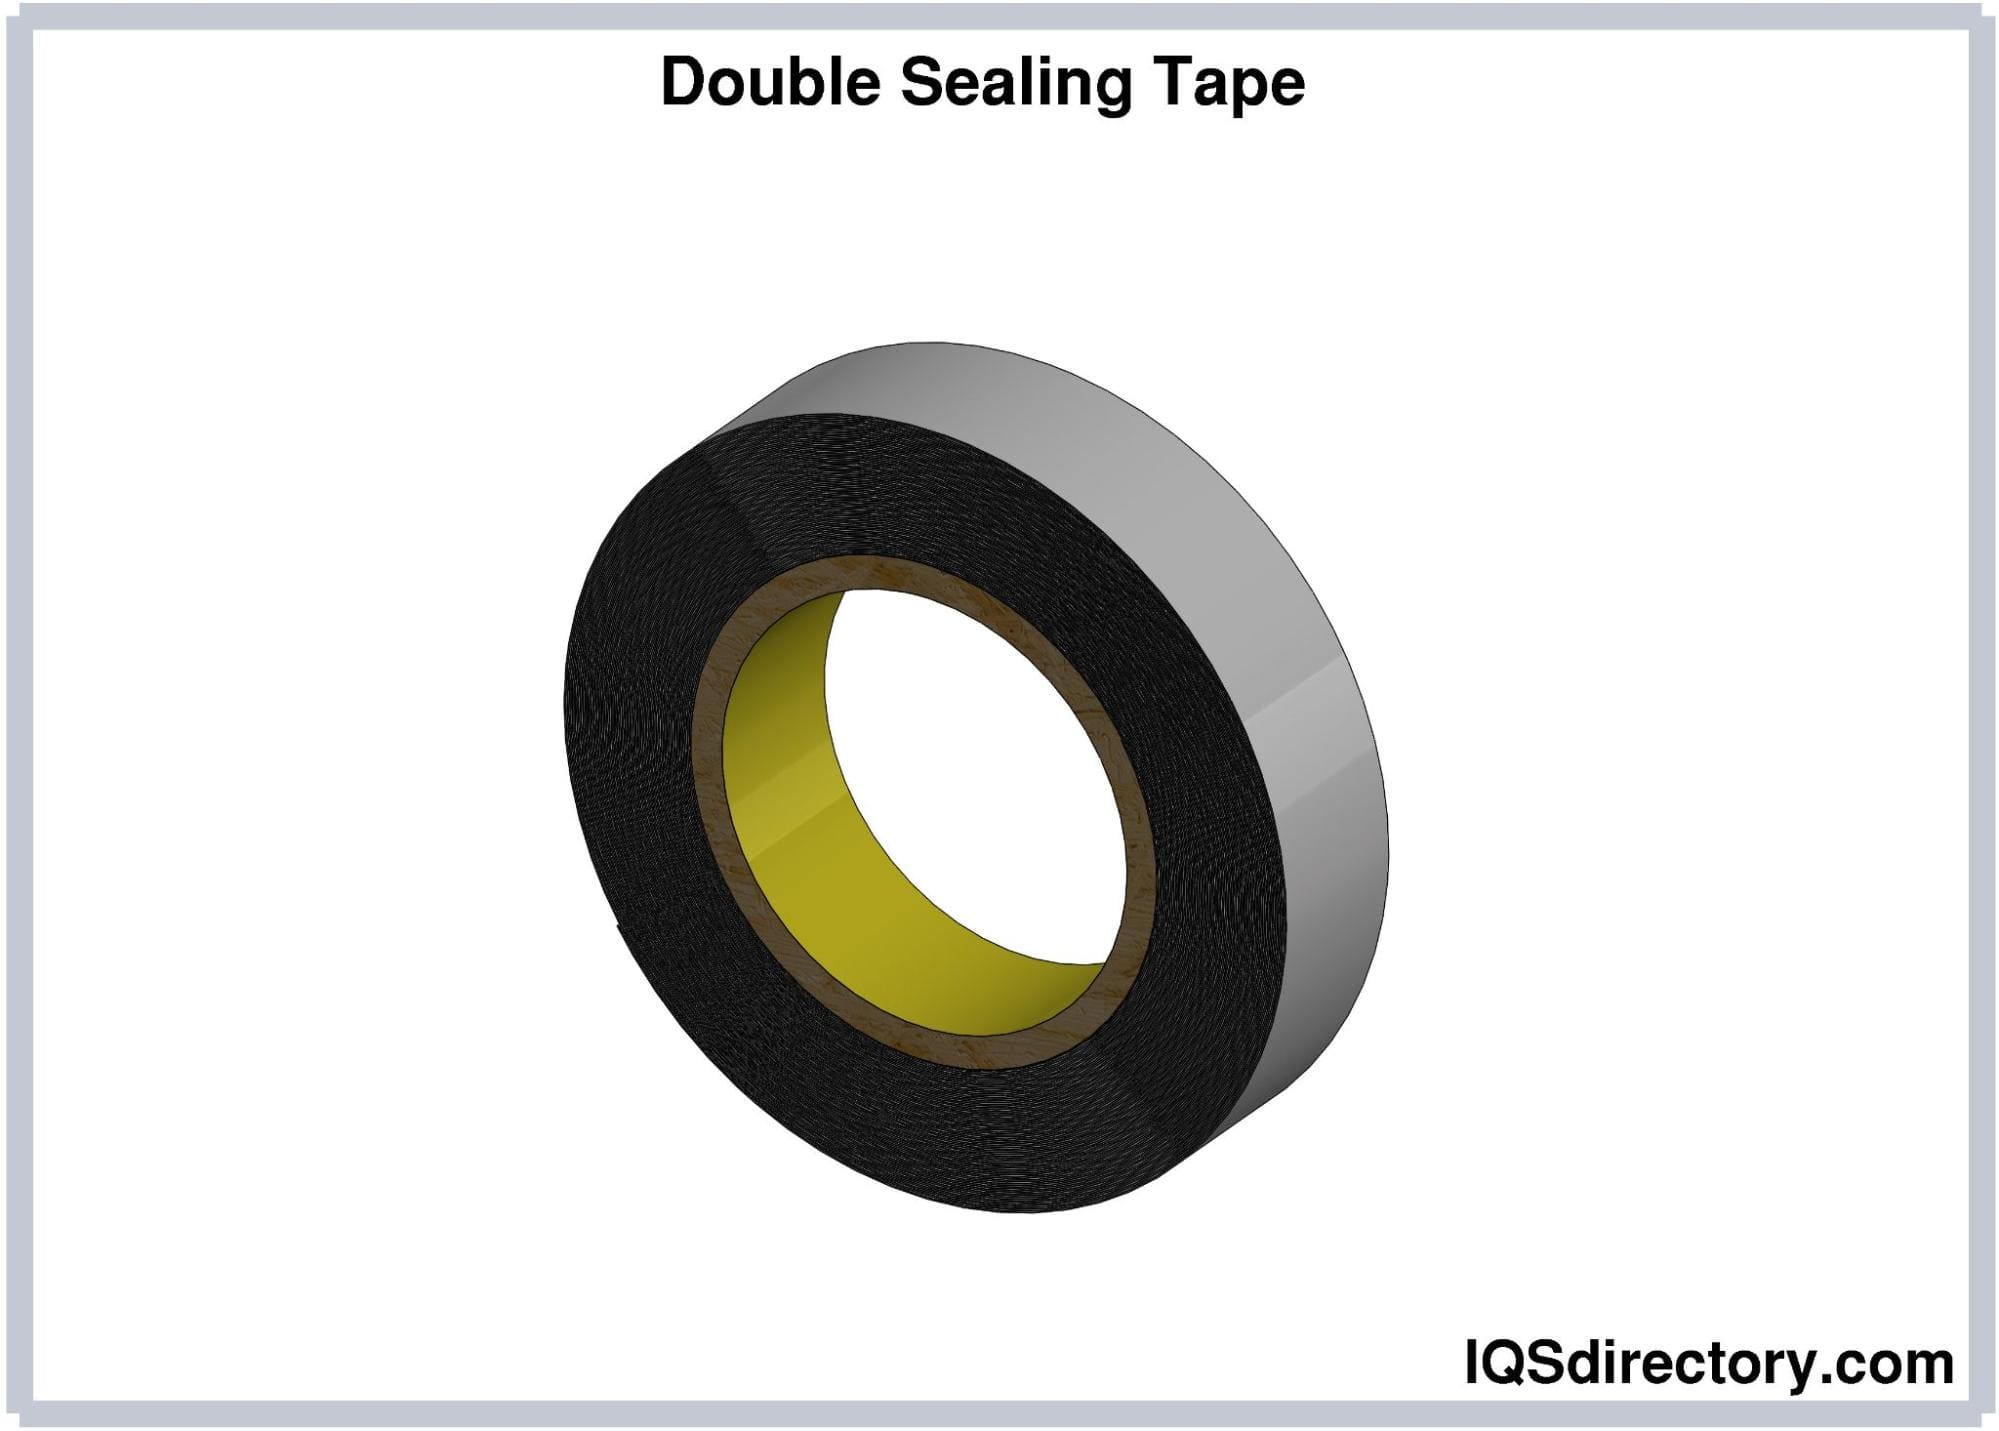 Double Sealing Tape